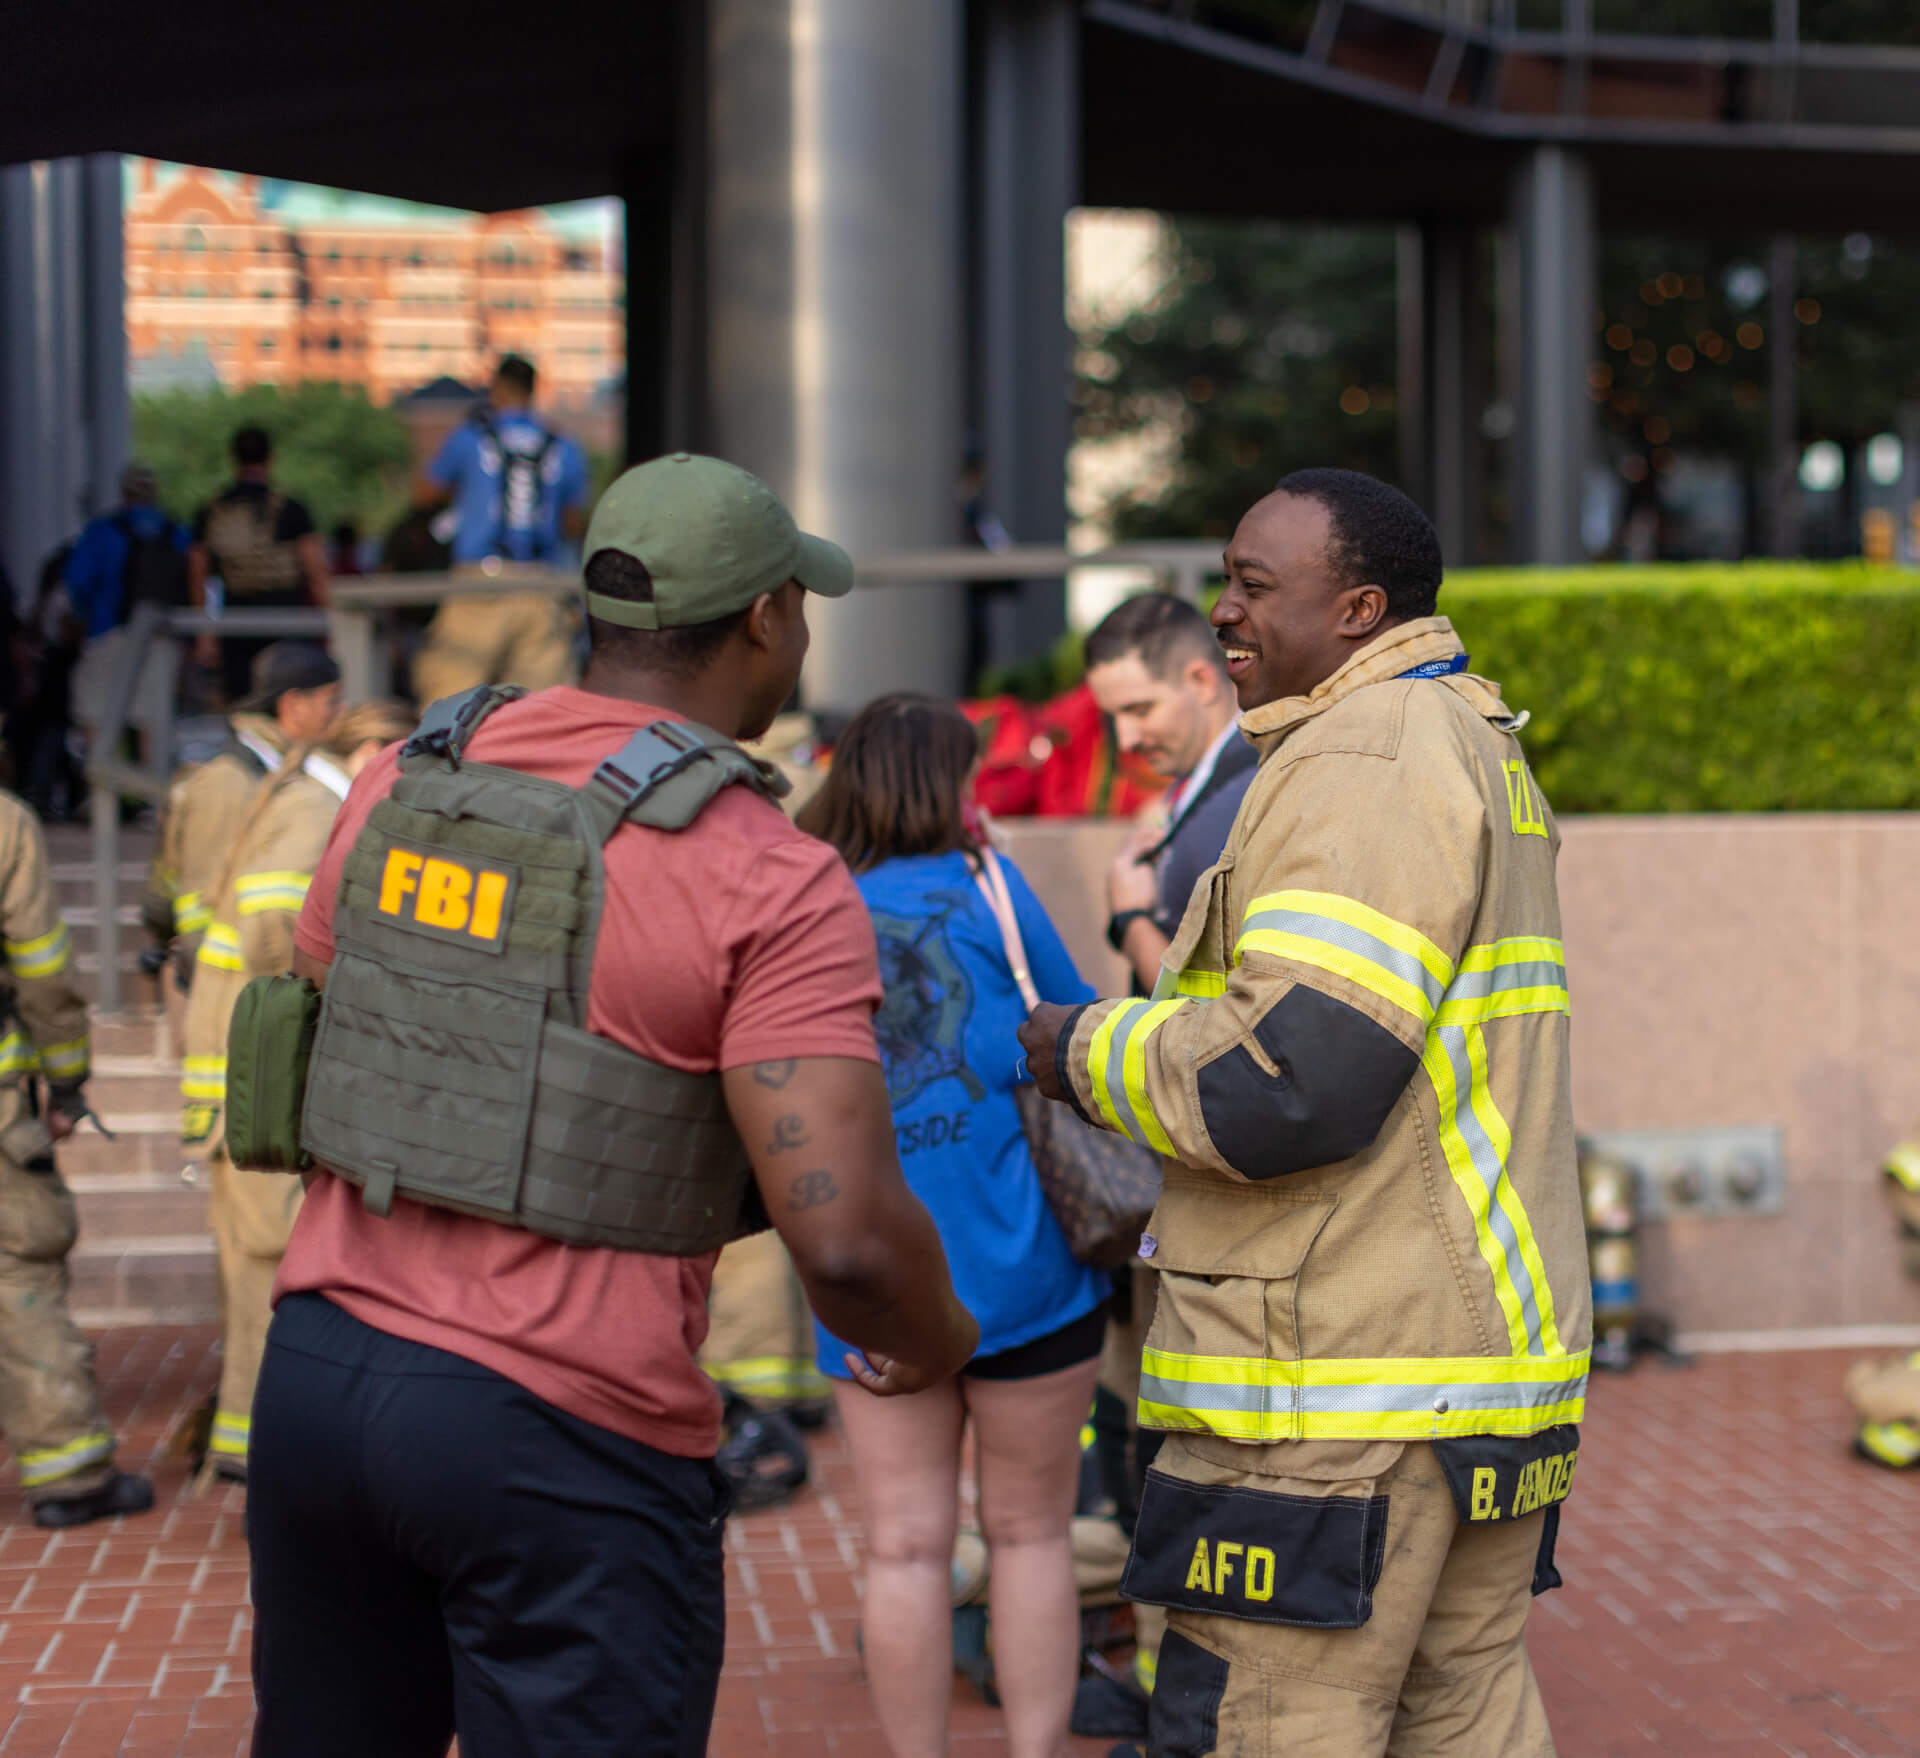 firemen and fbi member at the event